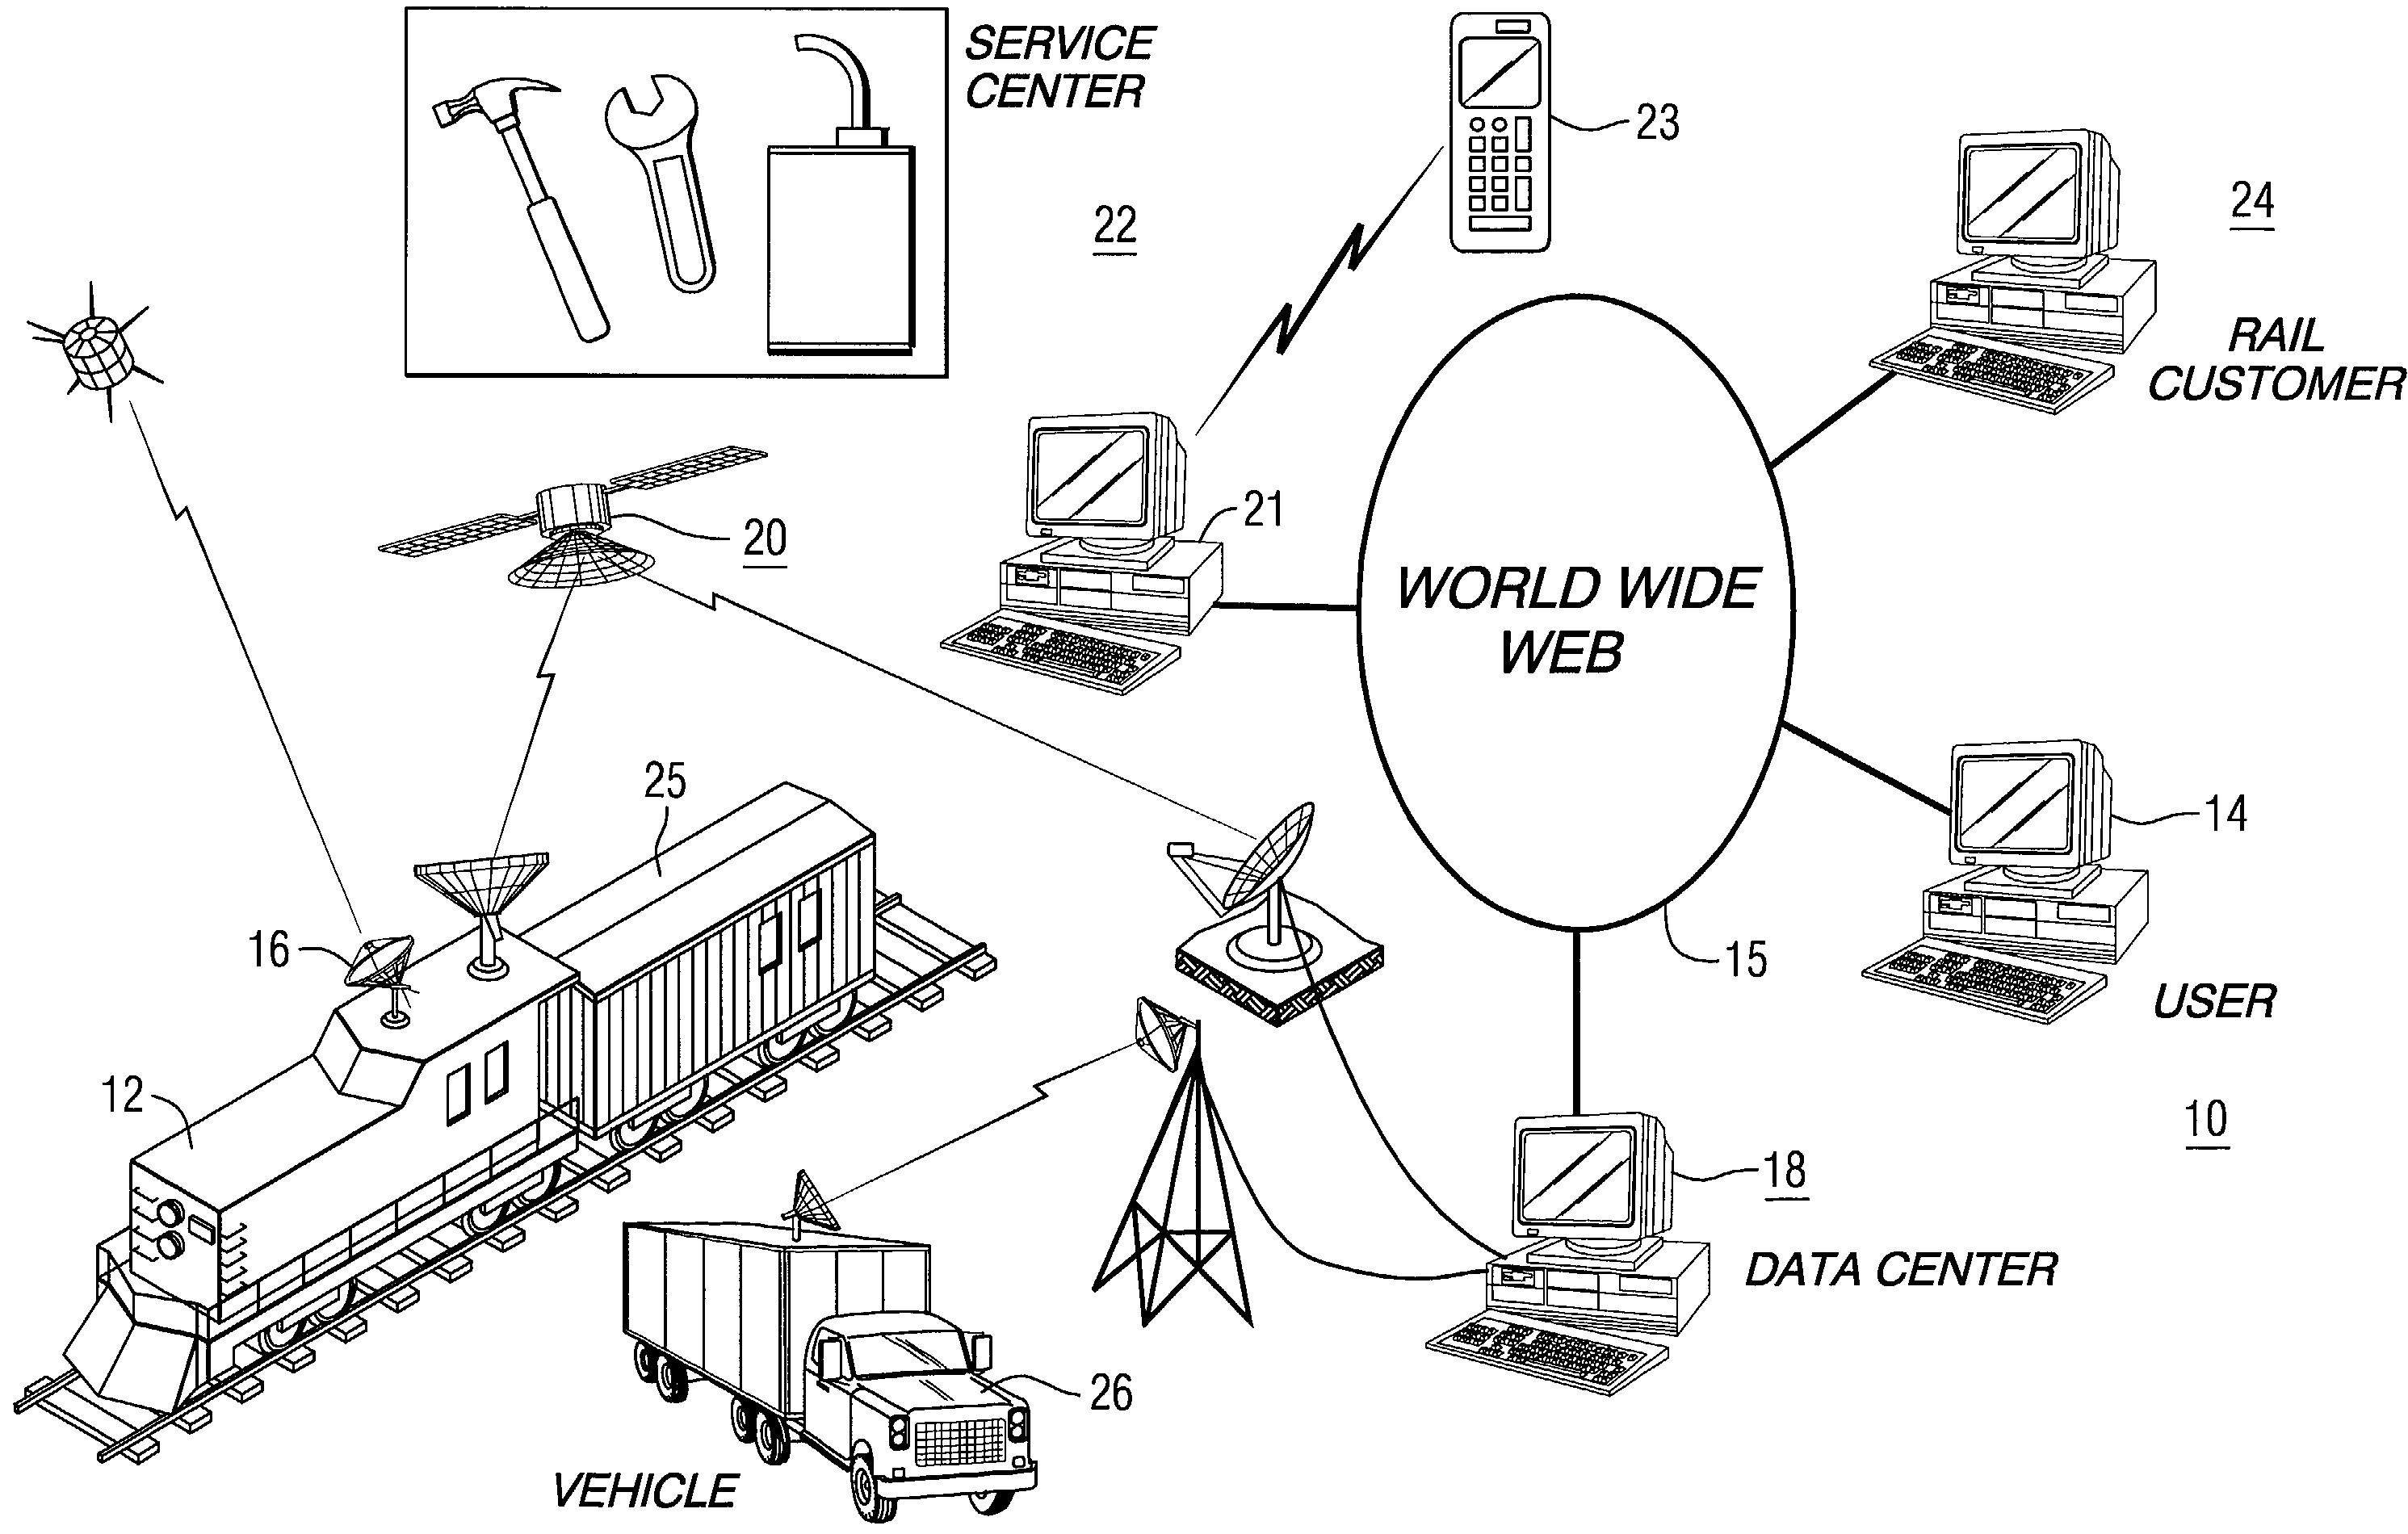 System and method for managing a fleet of remote assets